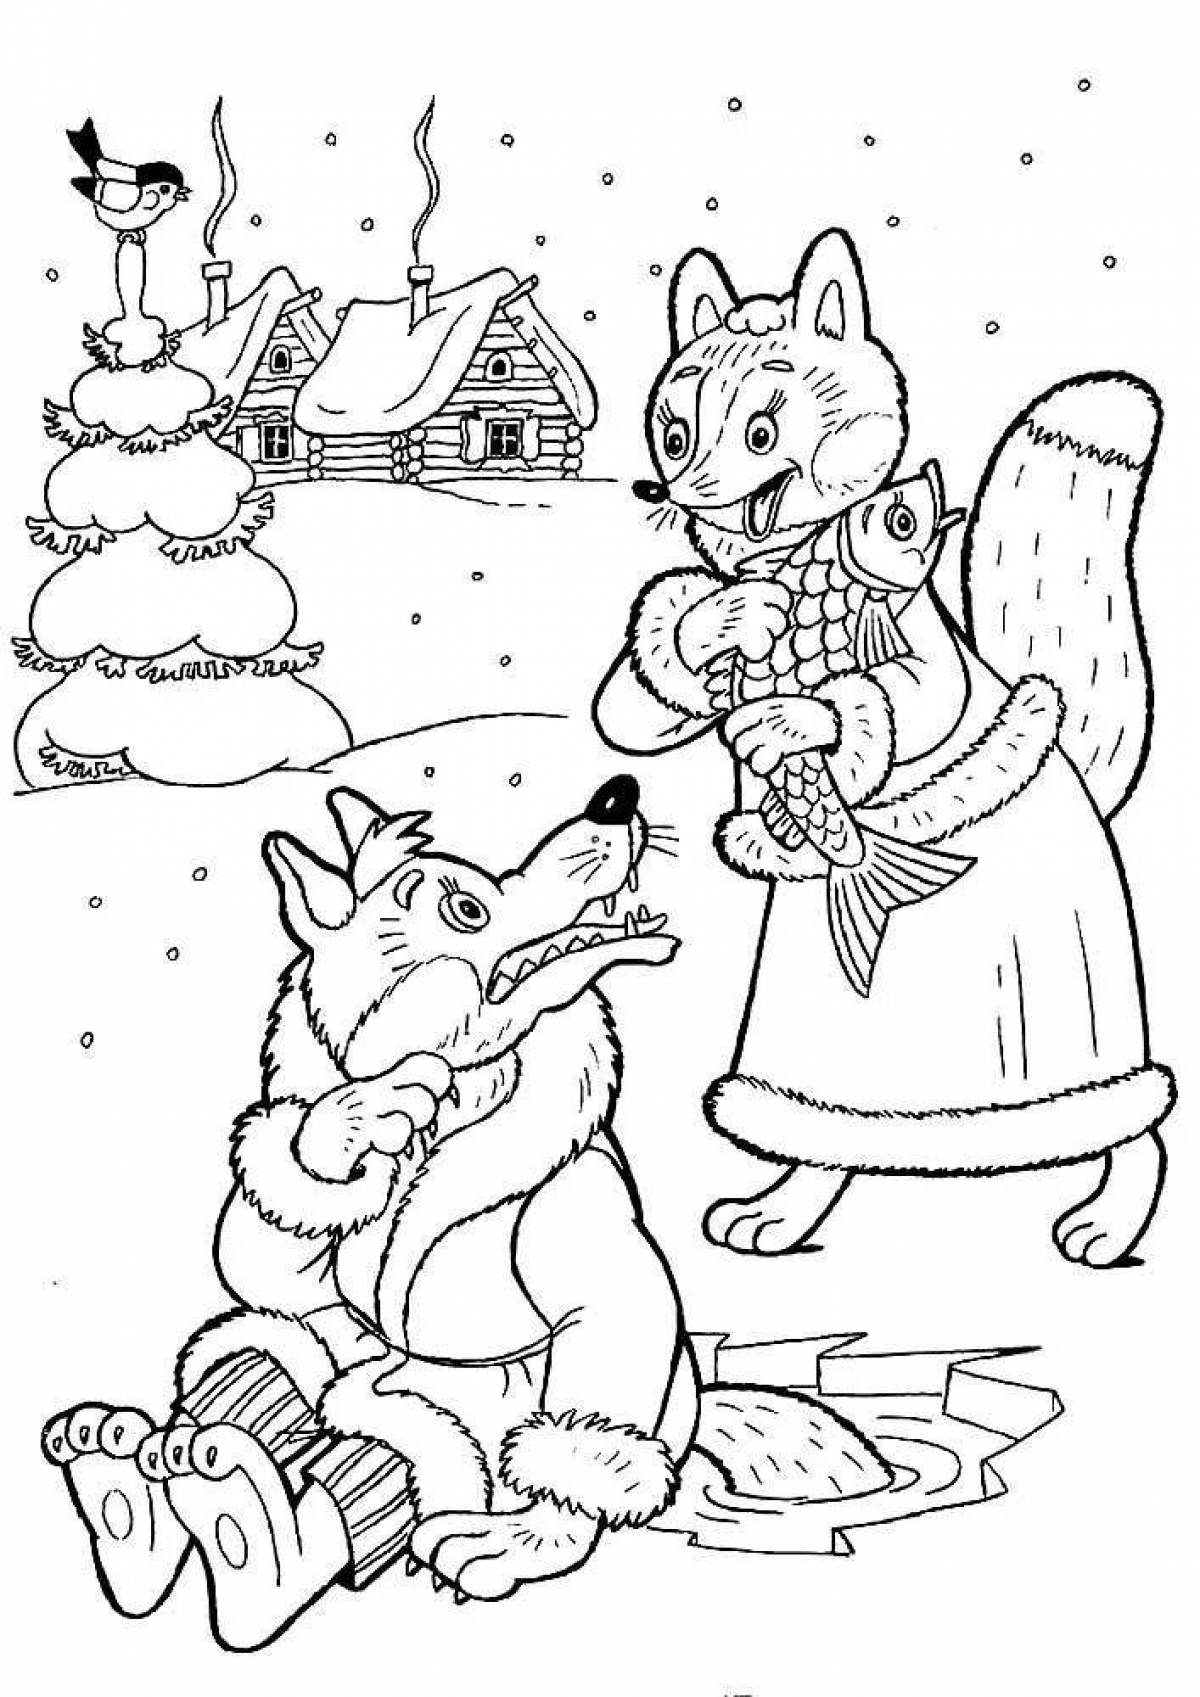 Inspirational coloring book for Russian folk tales